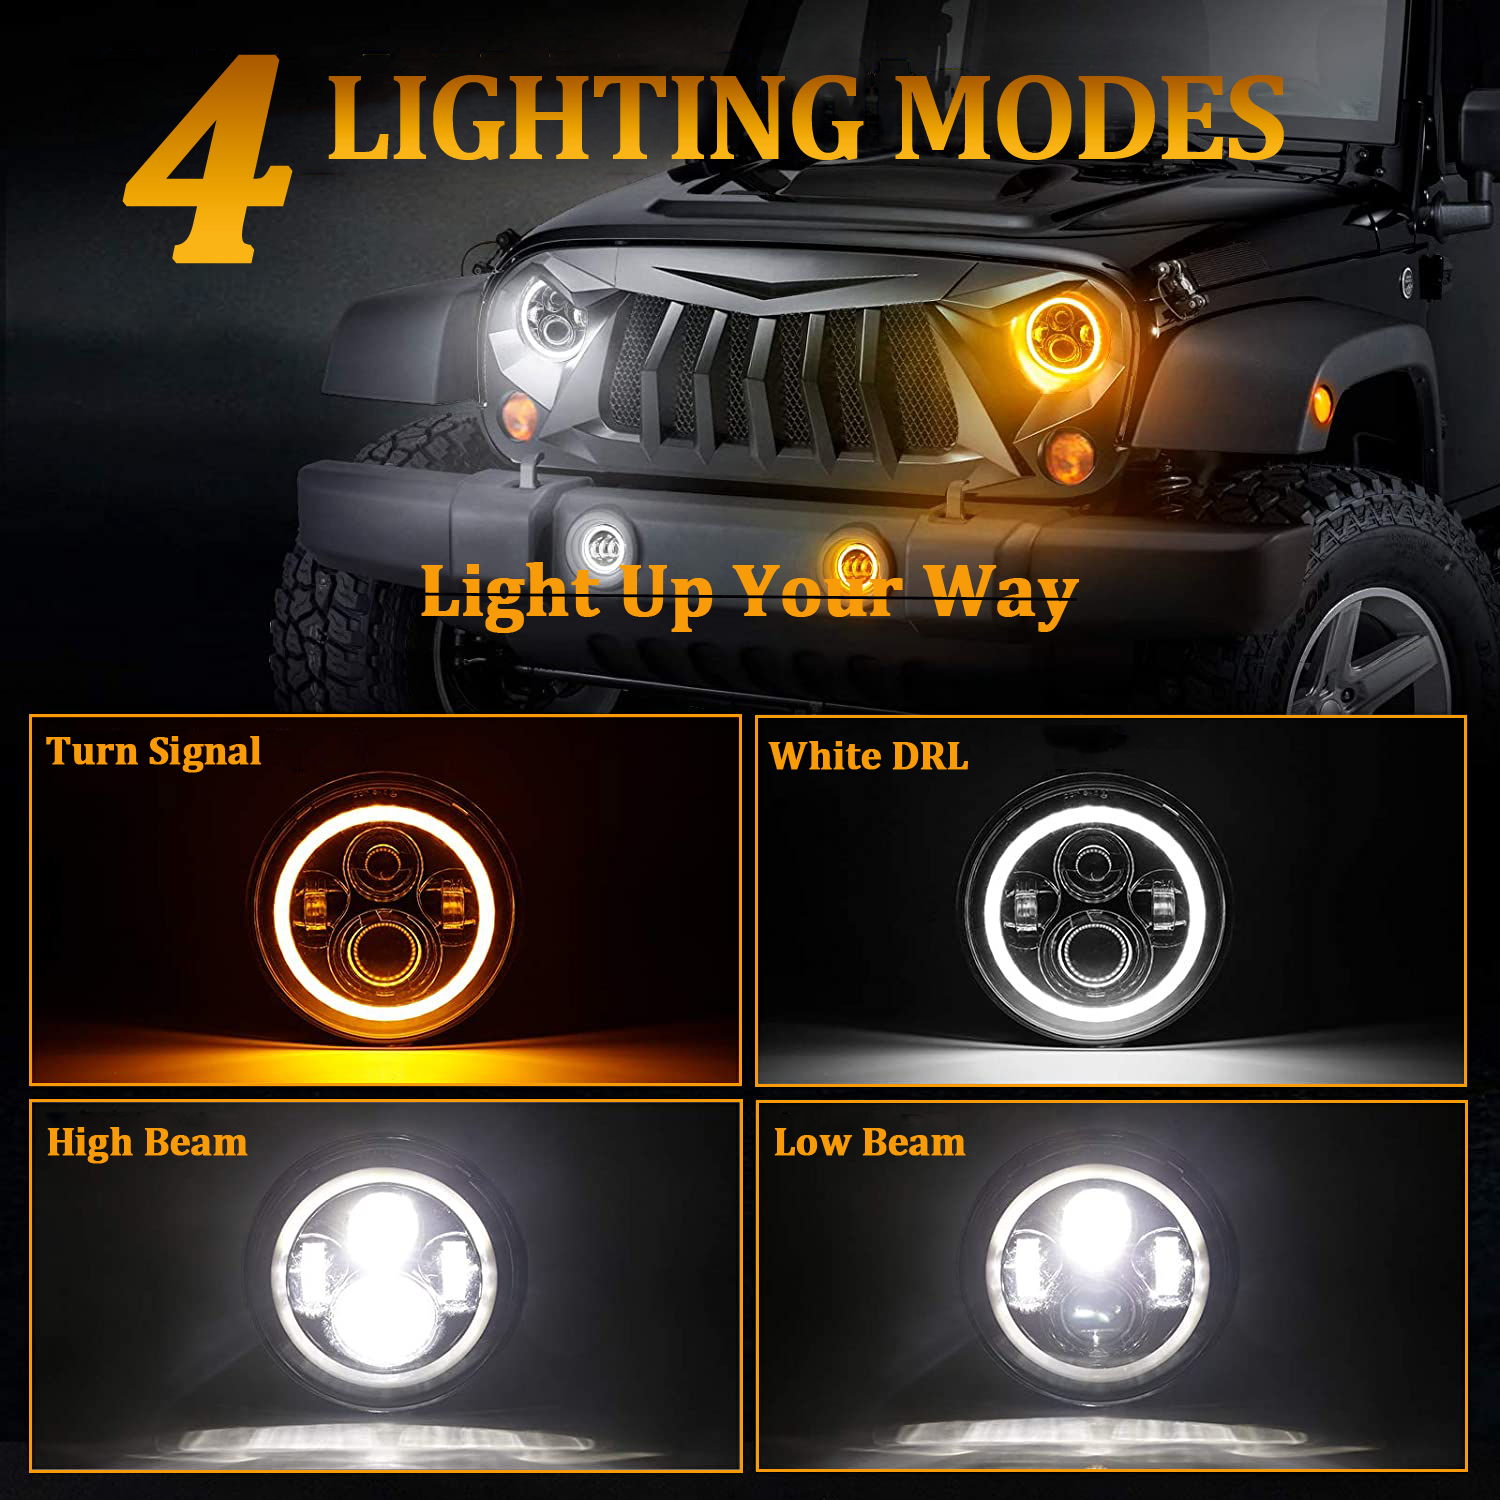 4 inch LED Fog Lights Halo Turn Signal w/ H16 5202 Adapter Replacement for Jeep Wrangler 1997-2018 JK LJ TJ Partsam 7 inch Jeep Daymaker LED Headlights w/White DRL Halo Ring DRL/Amber 4PCS 